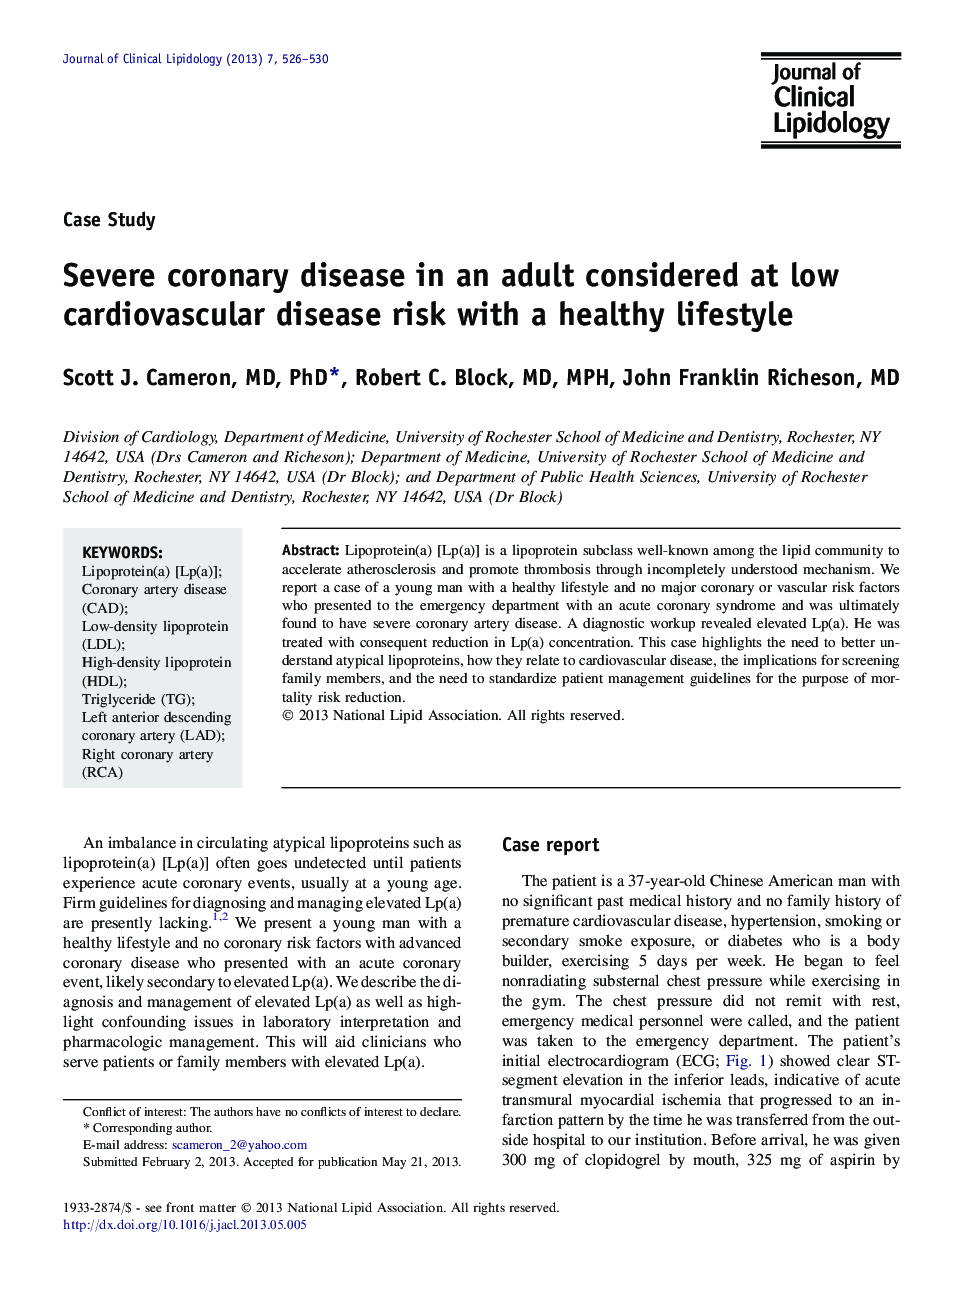 Severe coronary disease in an adult considered at low cardiovascular disease risk with a healthy lifestyle